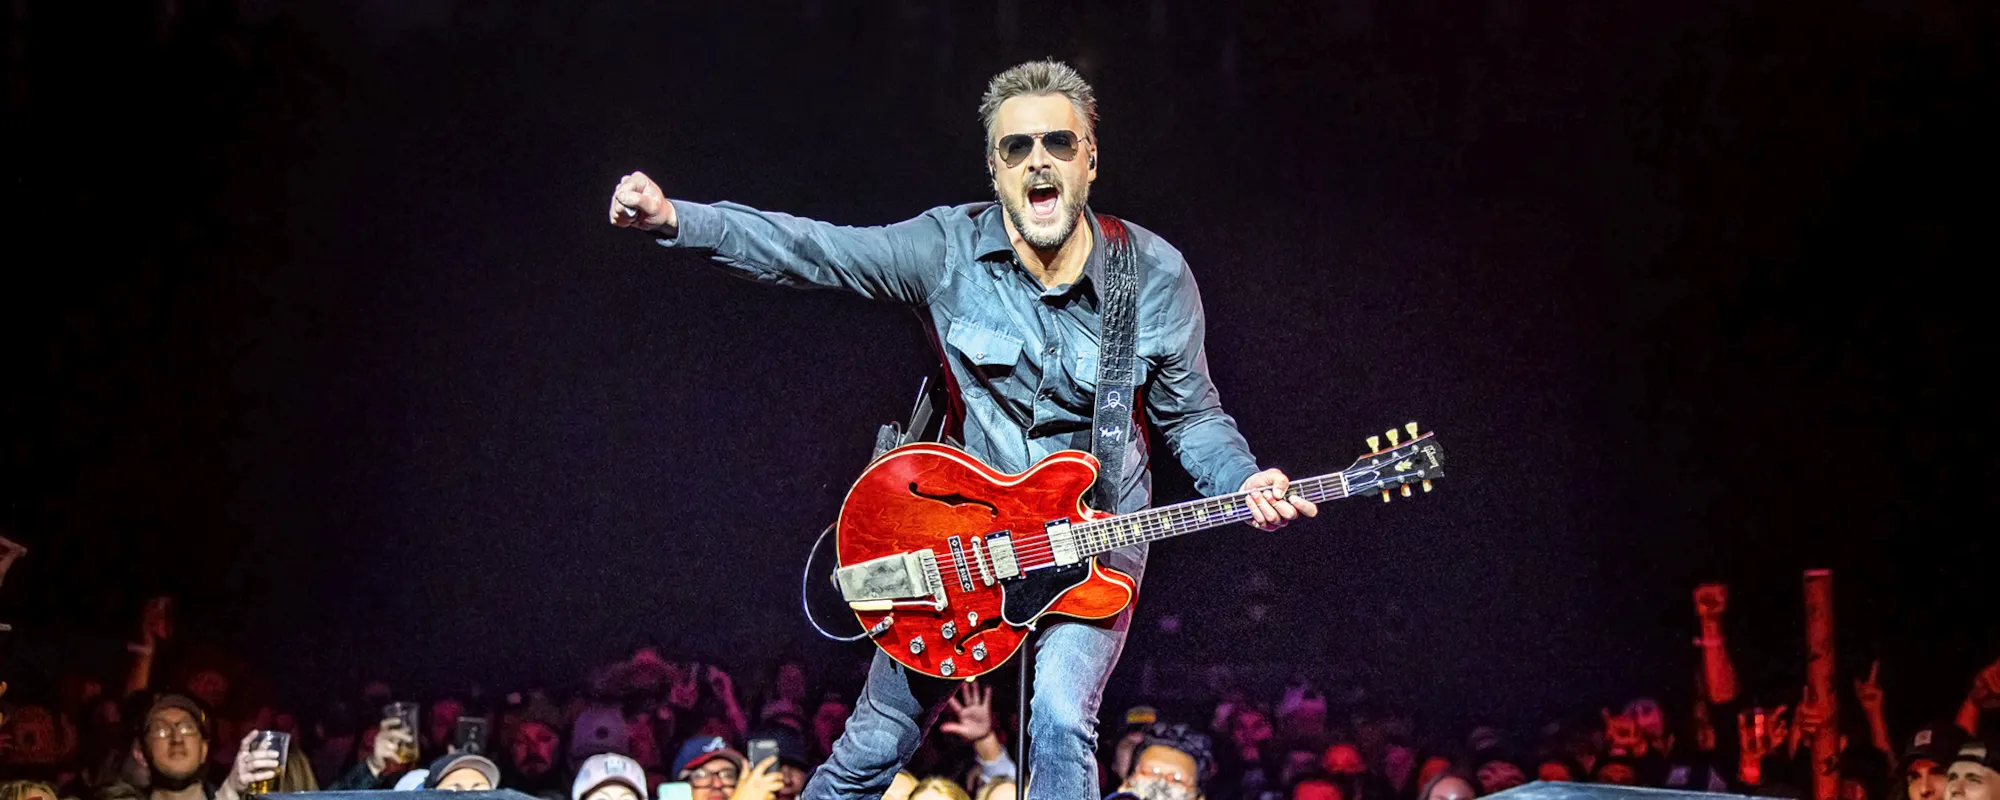 Behind the Beef: Why Eric Church and Rascal Flatts Clashed on Tour